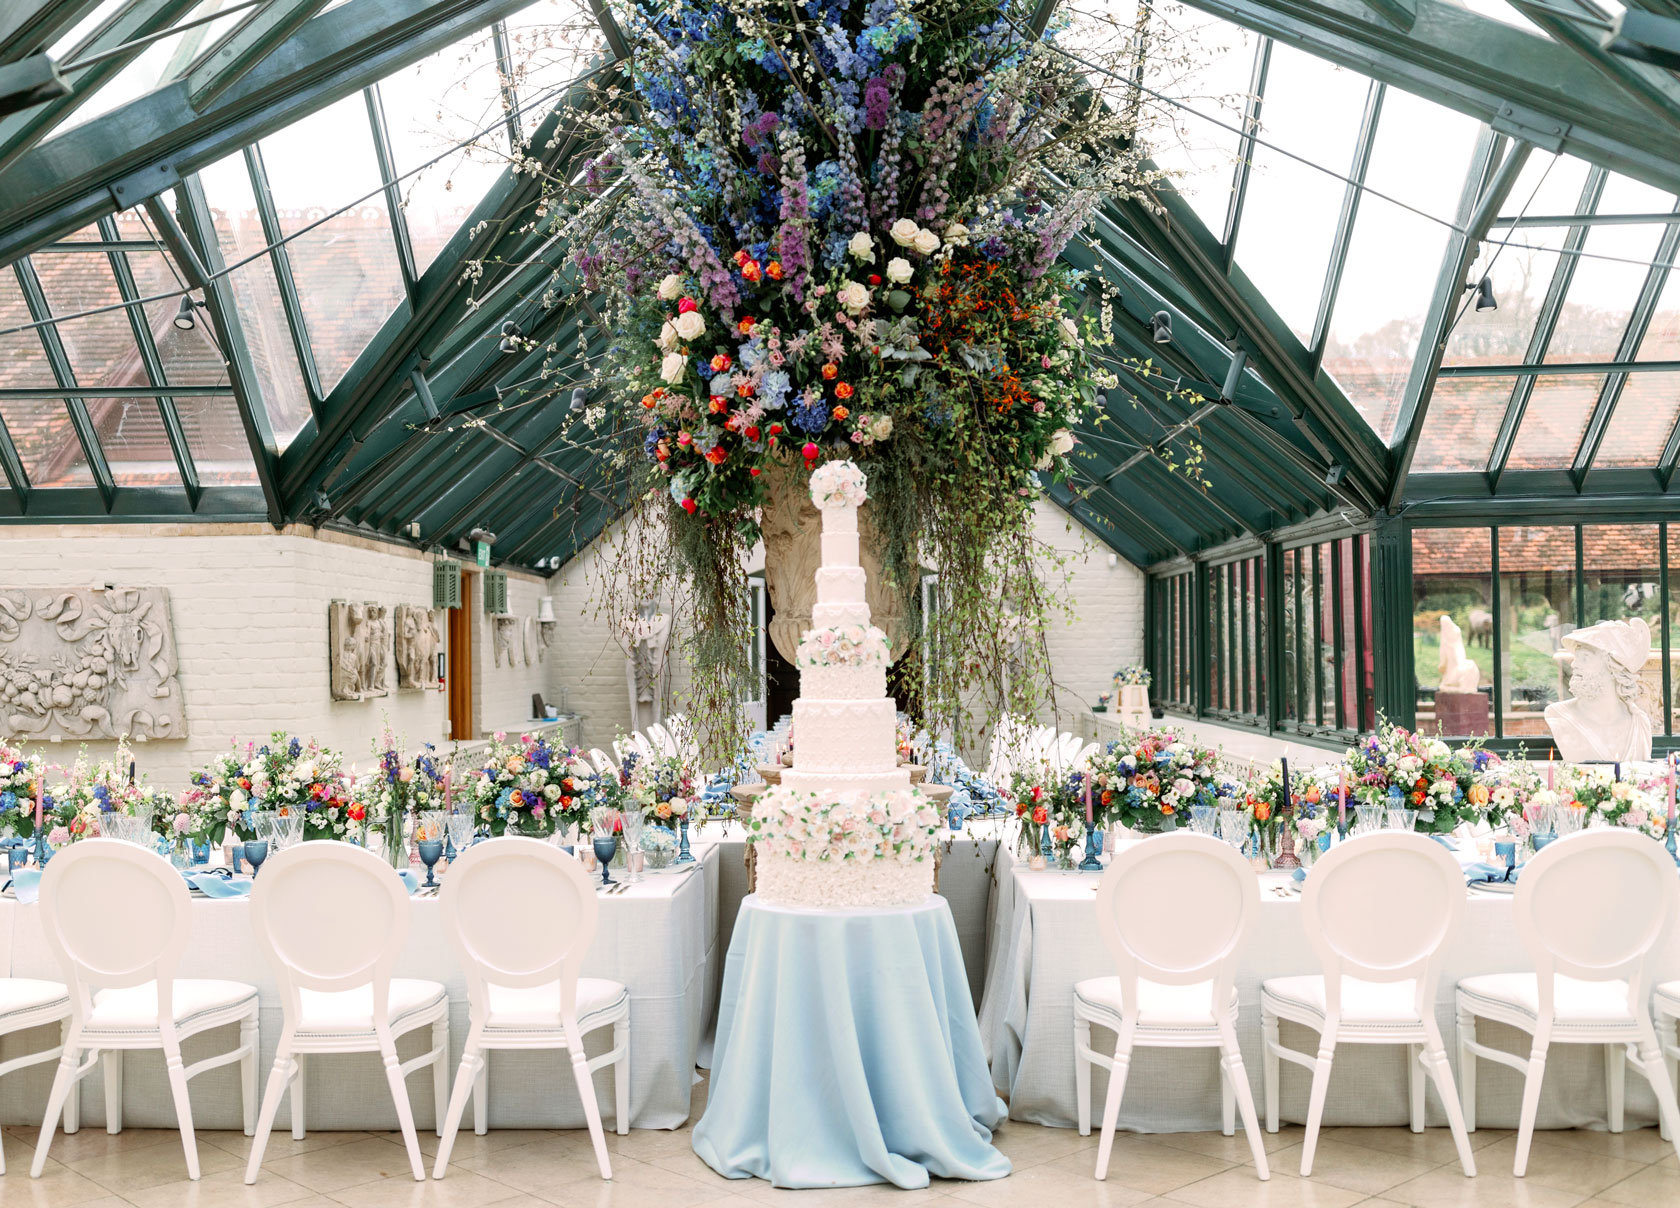 a huge wedding cake in an orangery surrounded by beautiful flowers and floral tablescape